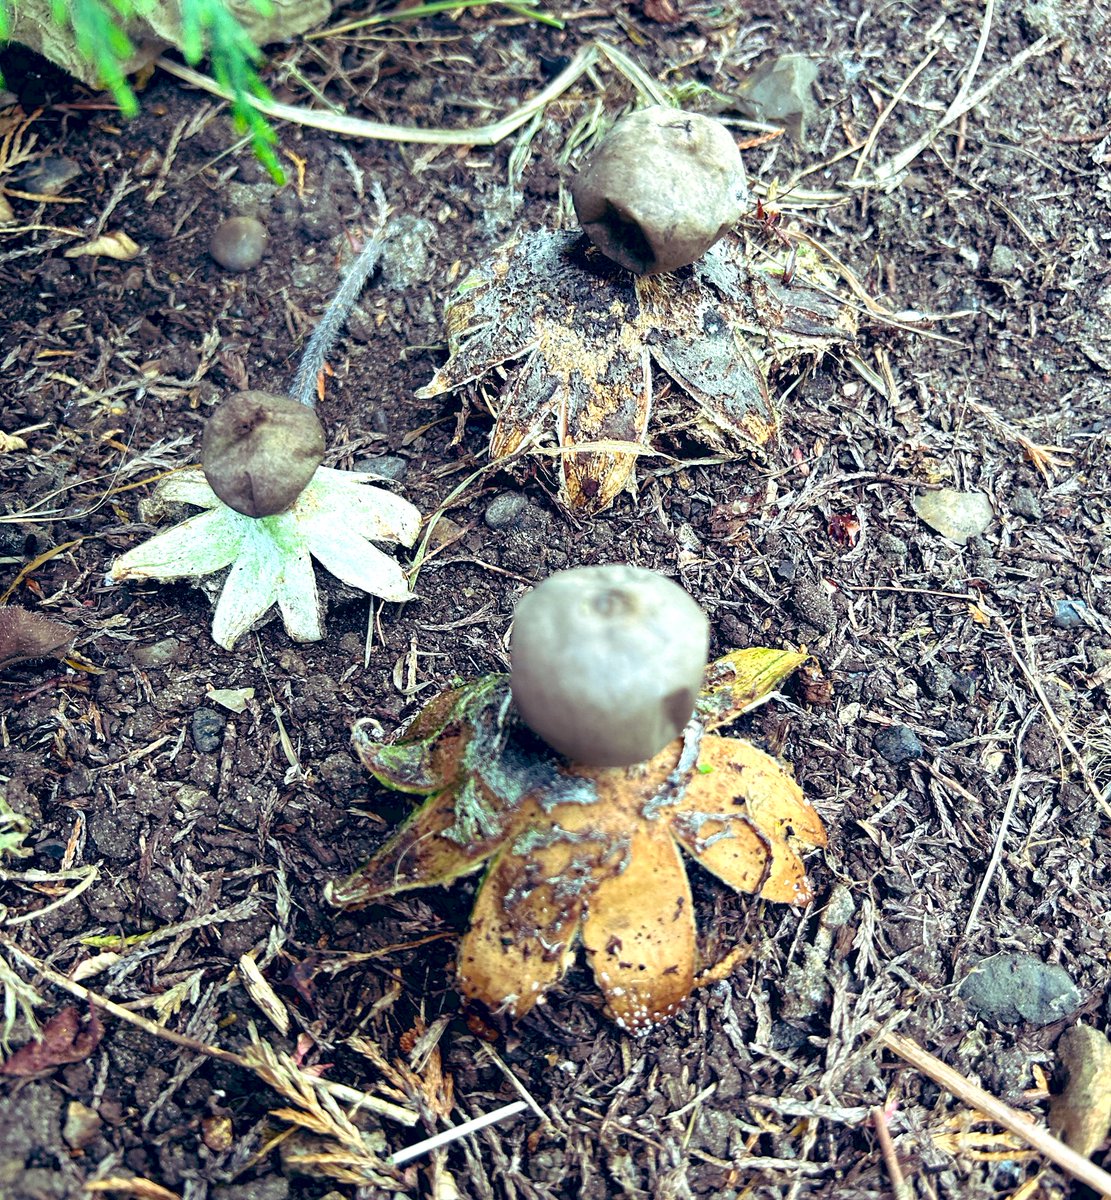 Did someone mention aliens? #earthstars